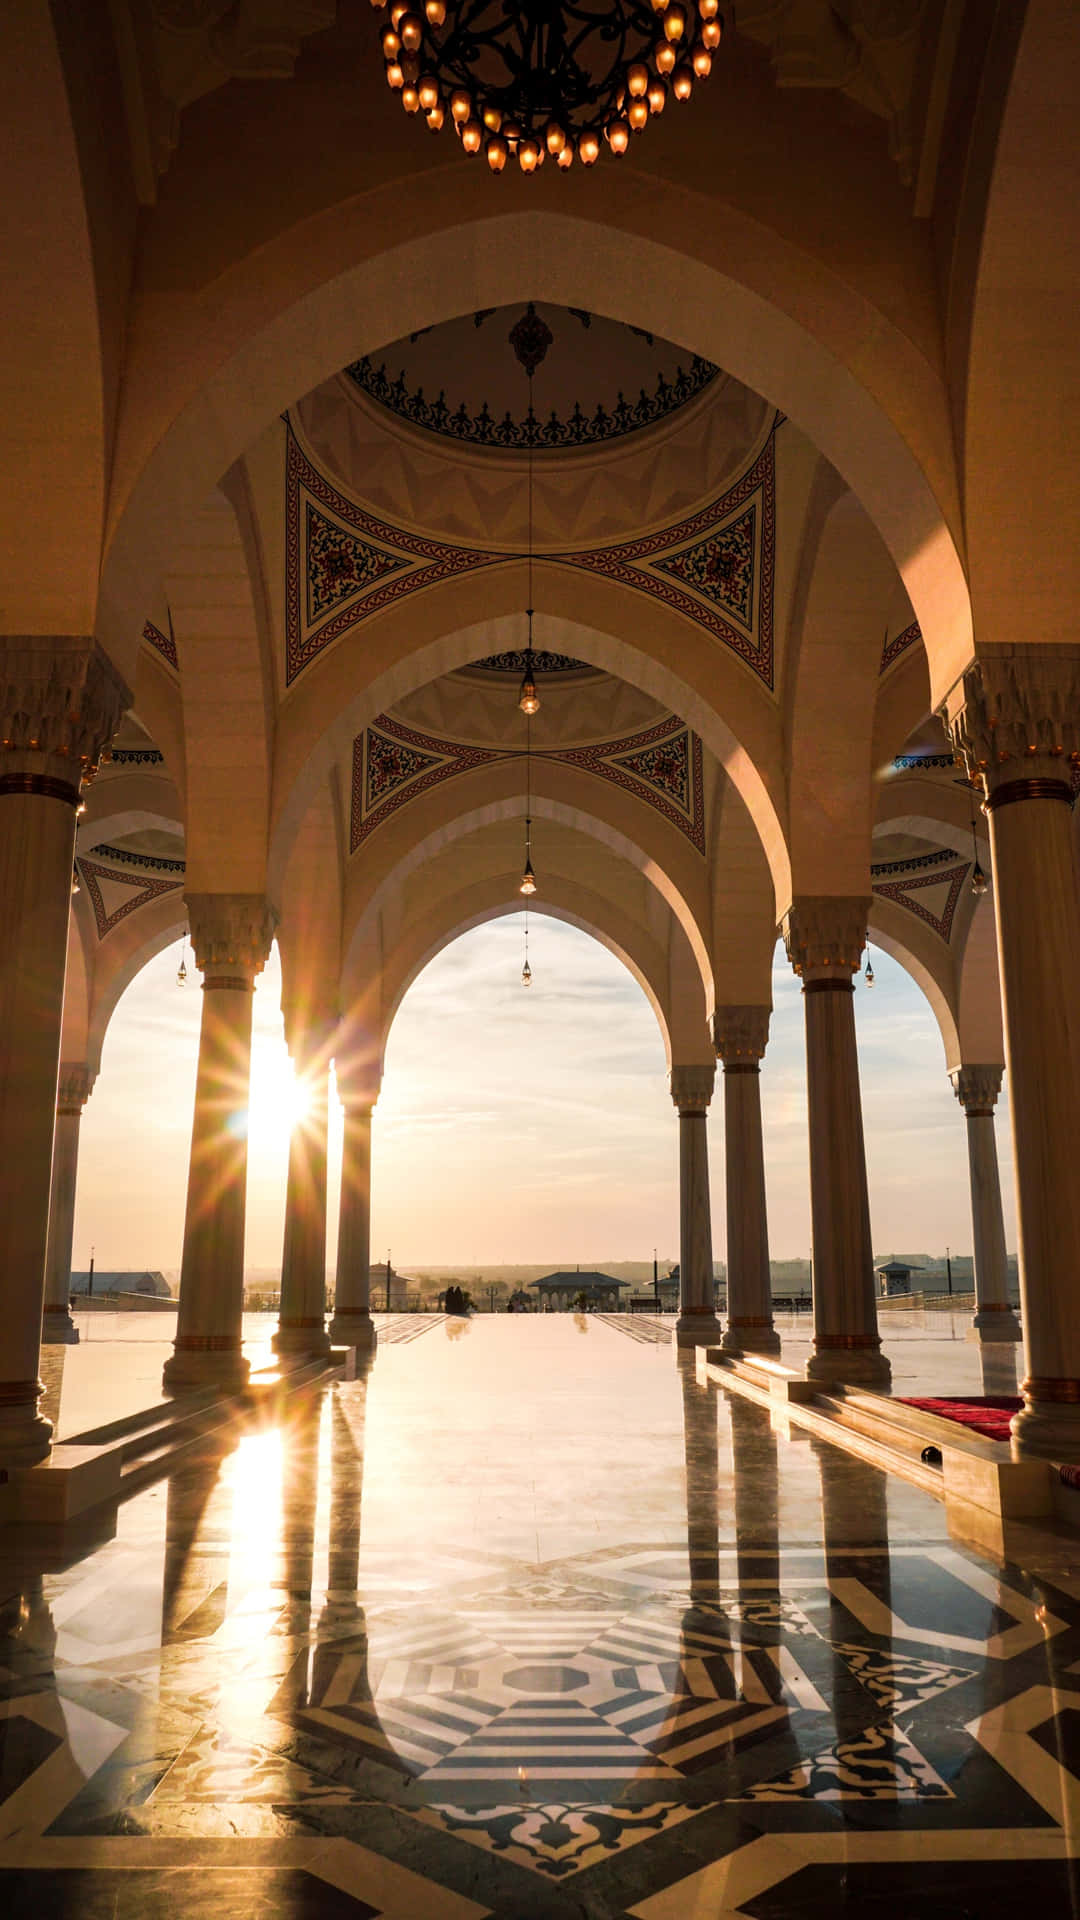 A Large Pool With Arches And A Sun Setting Behind It